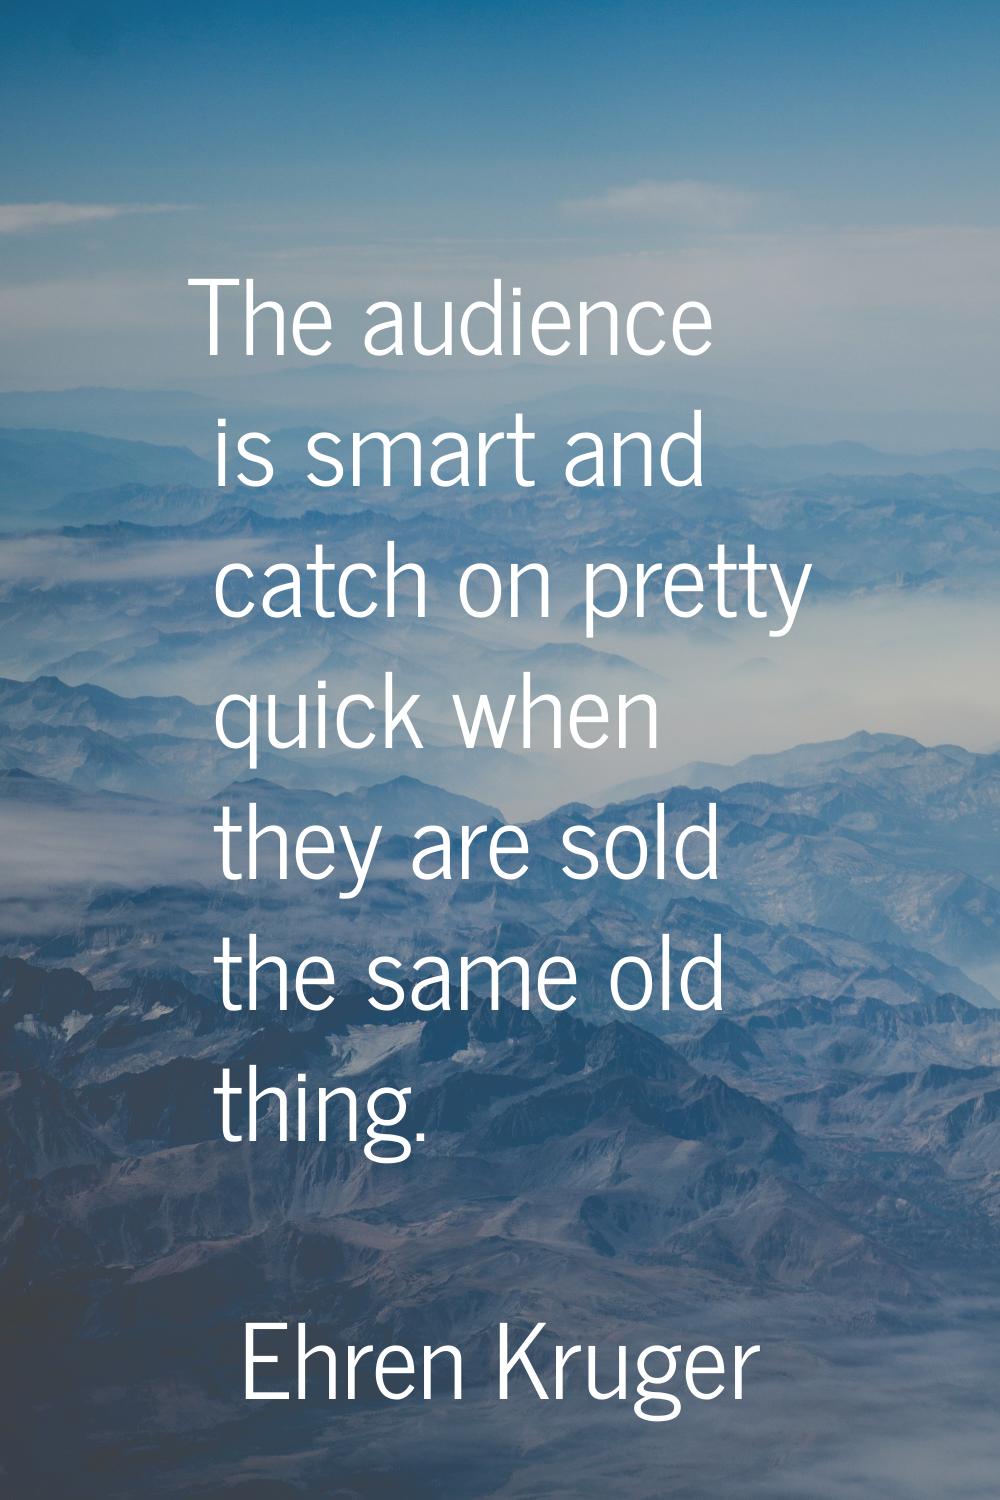 The audience is smart and catch on pretty quick when they are sold the same old thing.